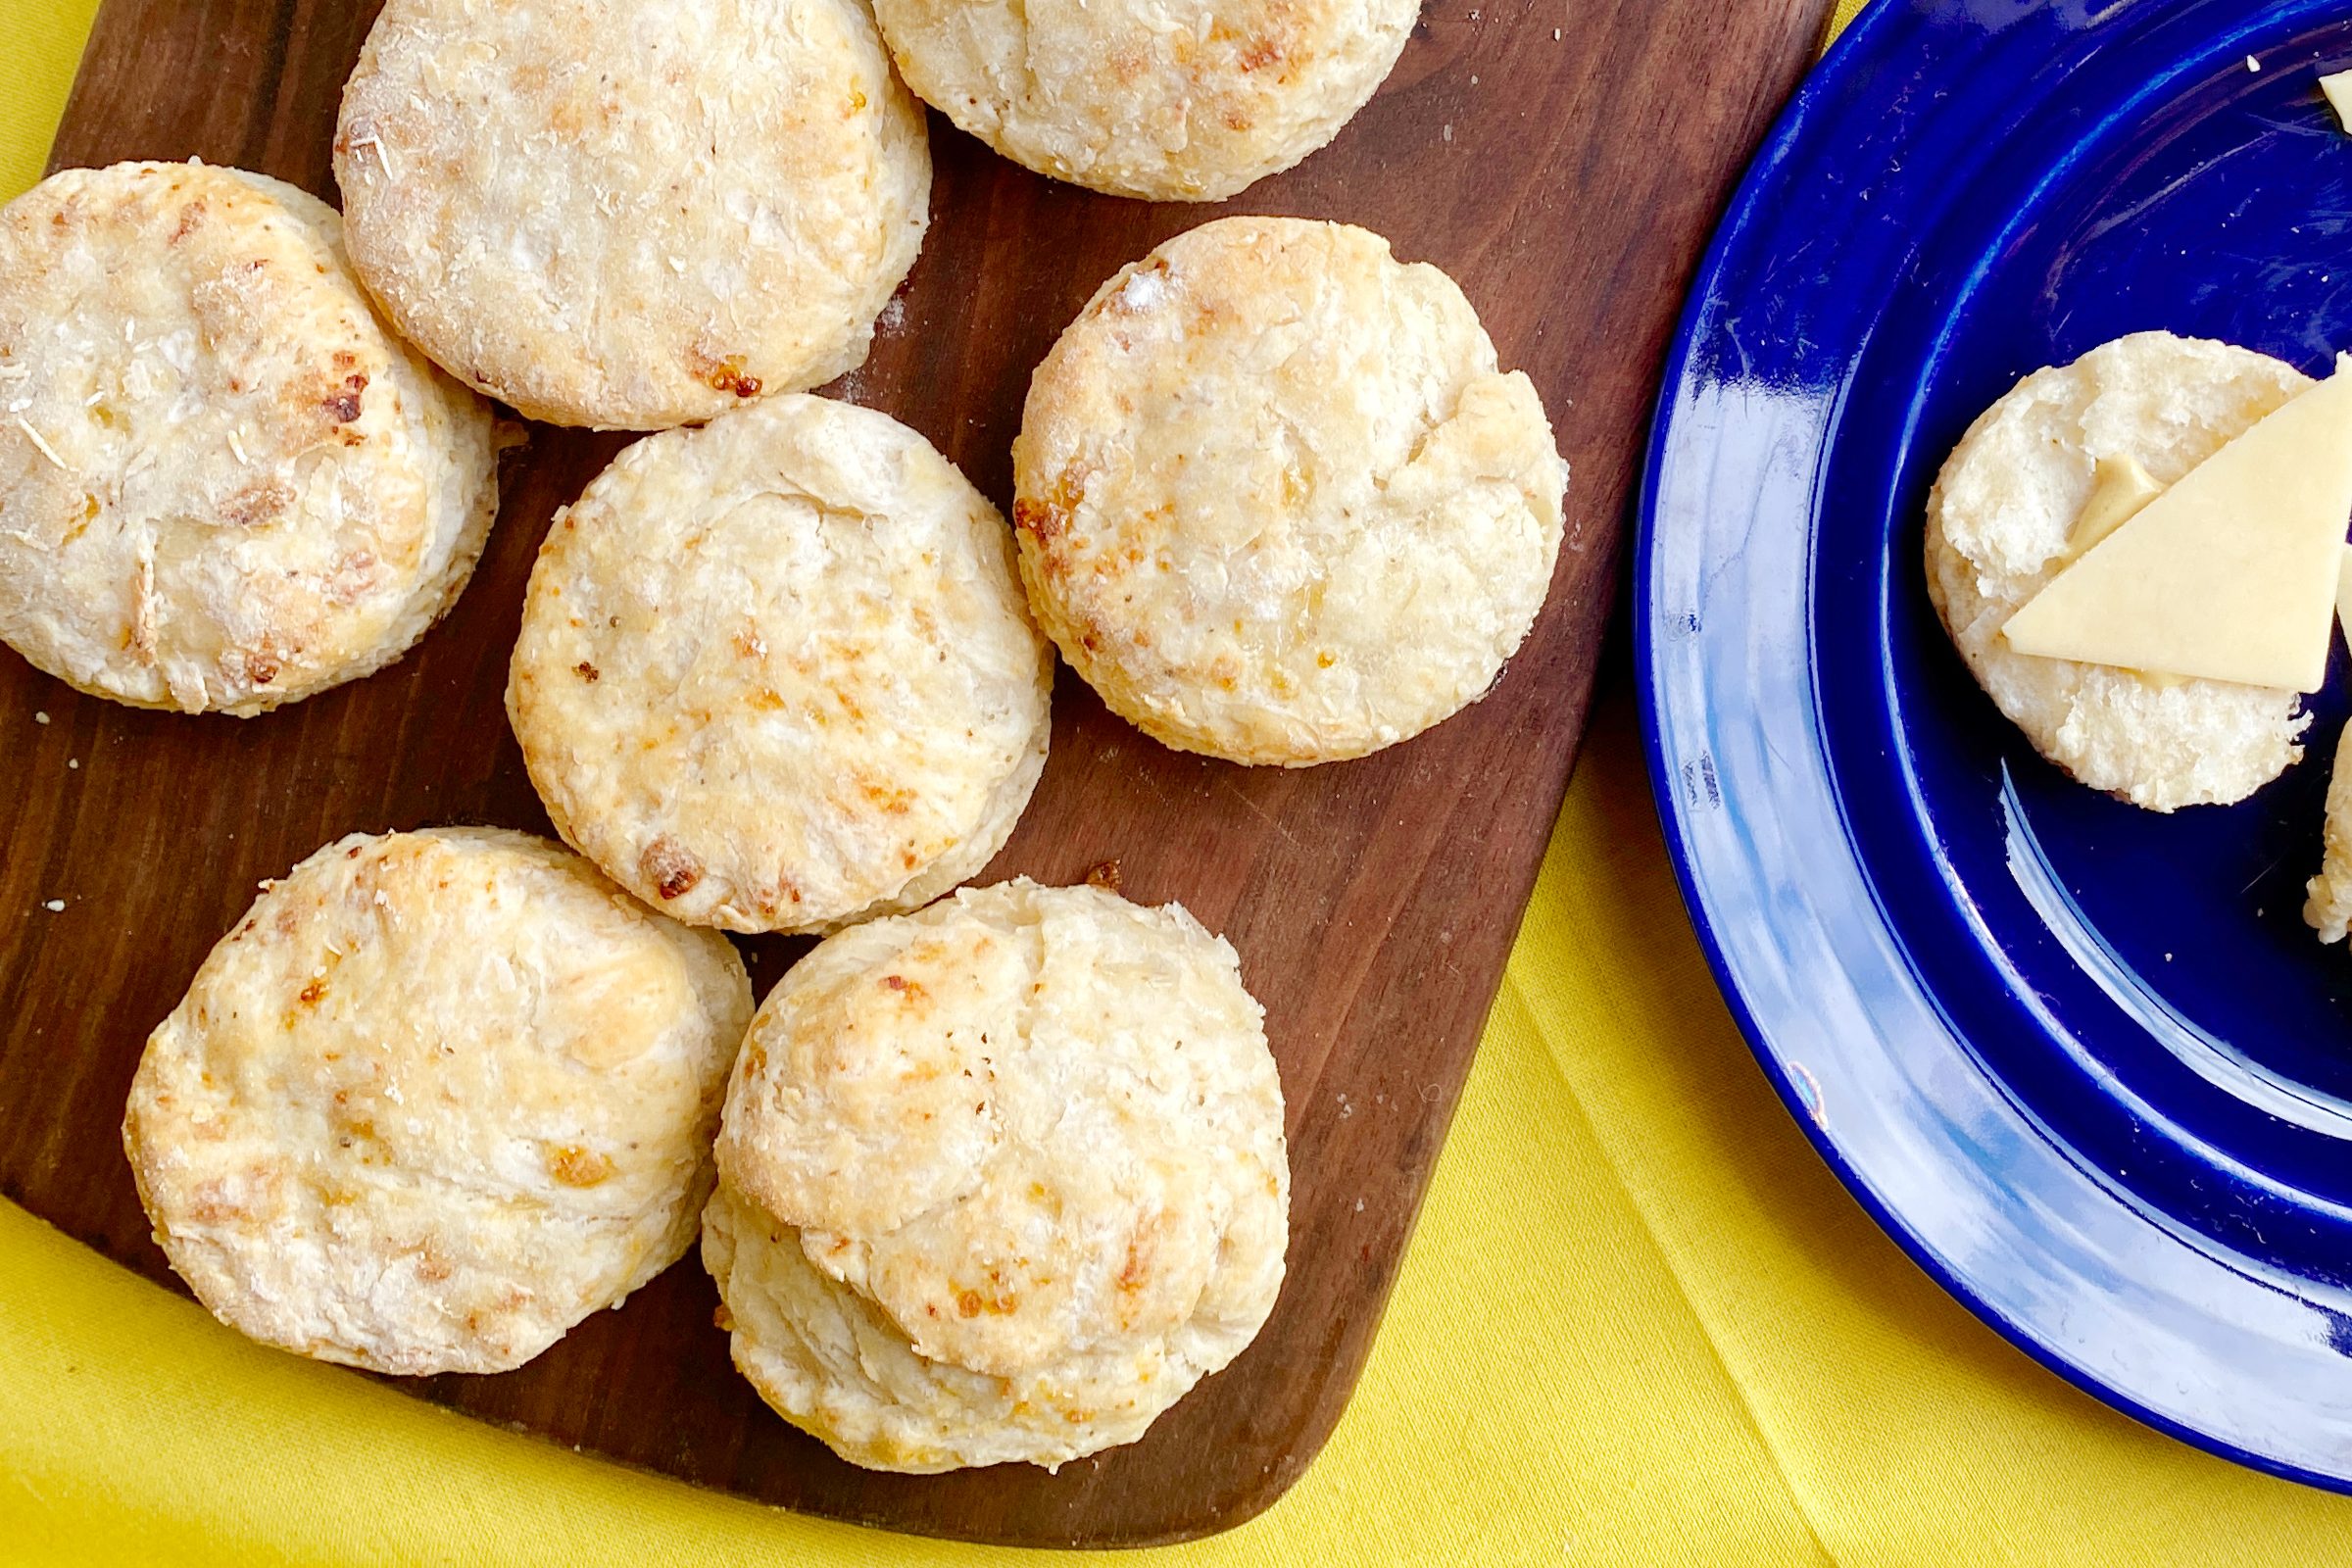 https://www.tasteofhome.com/wp-content/uploads/2022/07/cottage-cheese-biscuits-IMG-8220-Allison-Robicelli-for-TOH-JVedit.jpg